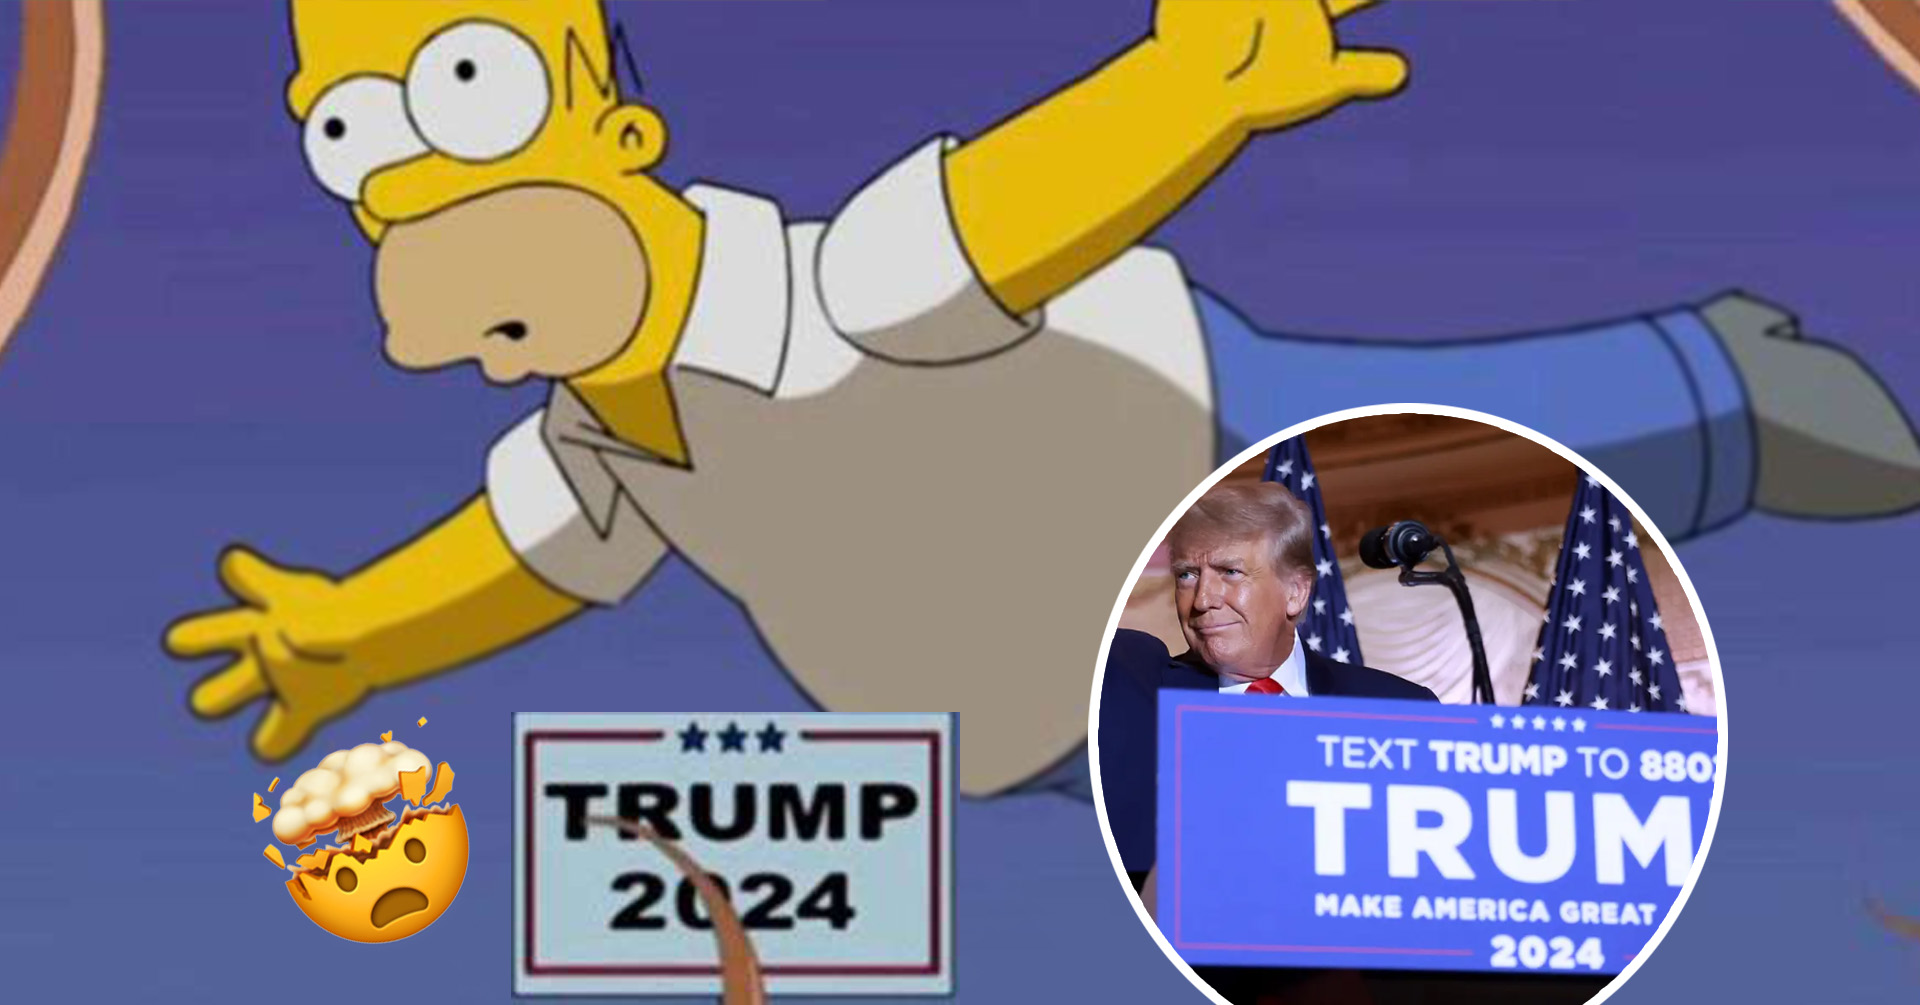 These are things The Simpsons have predicted over the years